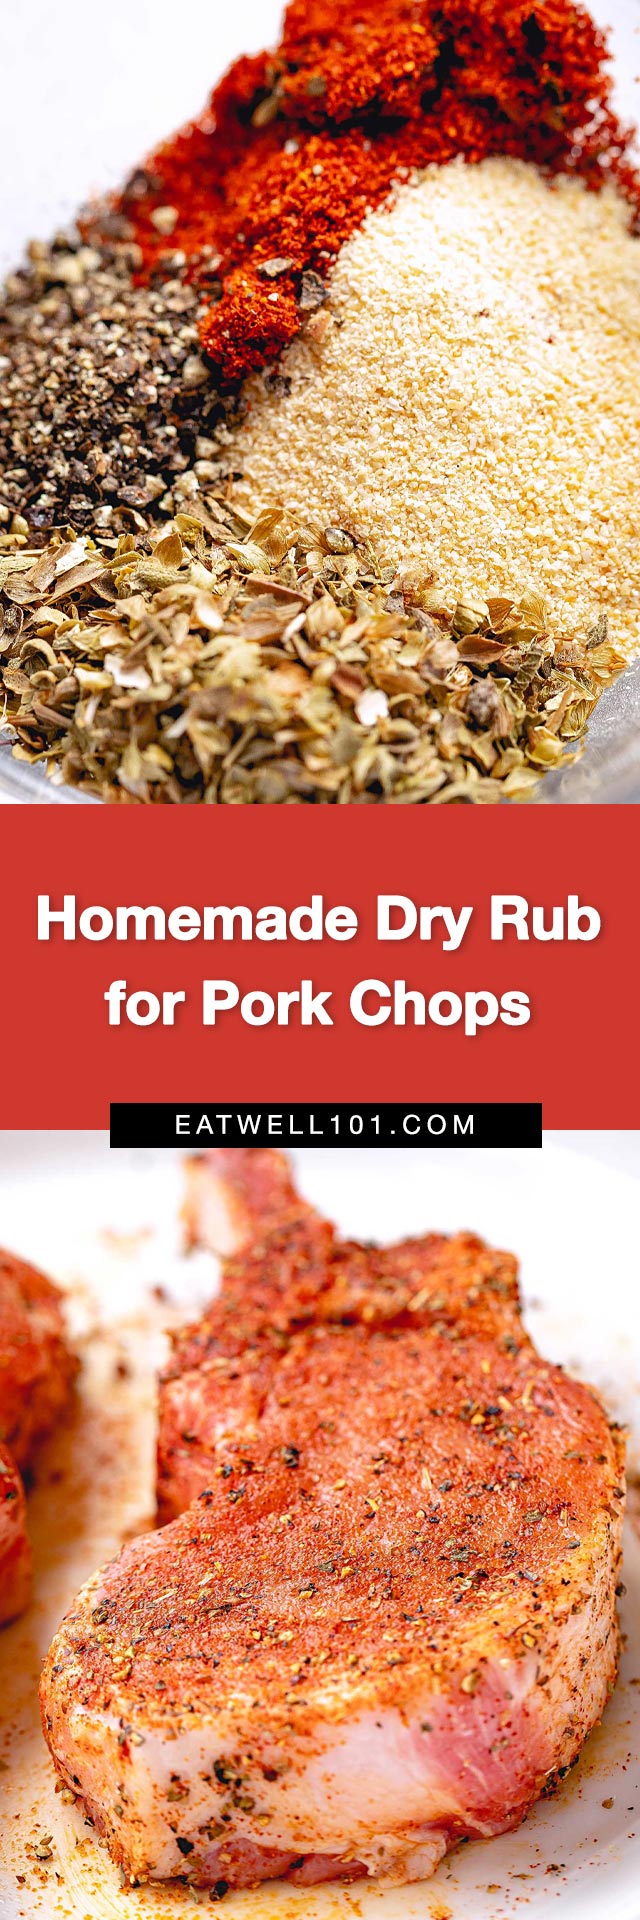 Homemade Rub Recipe for Pork Chops - #porkchops #rub #dry #recipe #spices #eatwell101 - This homemade pork chops rub recipe is savory and rich in flavor. It is the perfect spice rub to season your pork chops whatever your cooking method is.